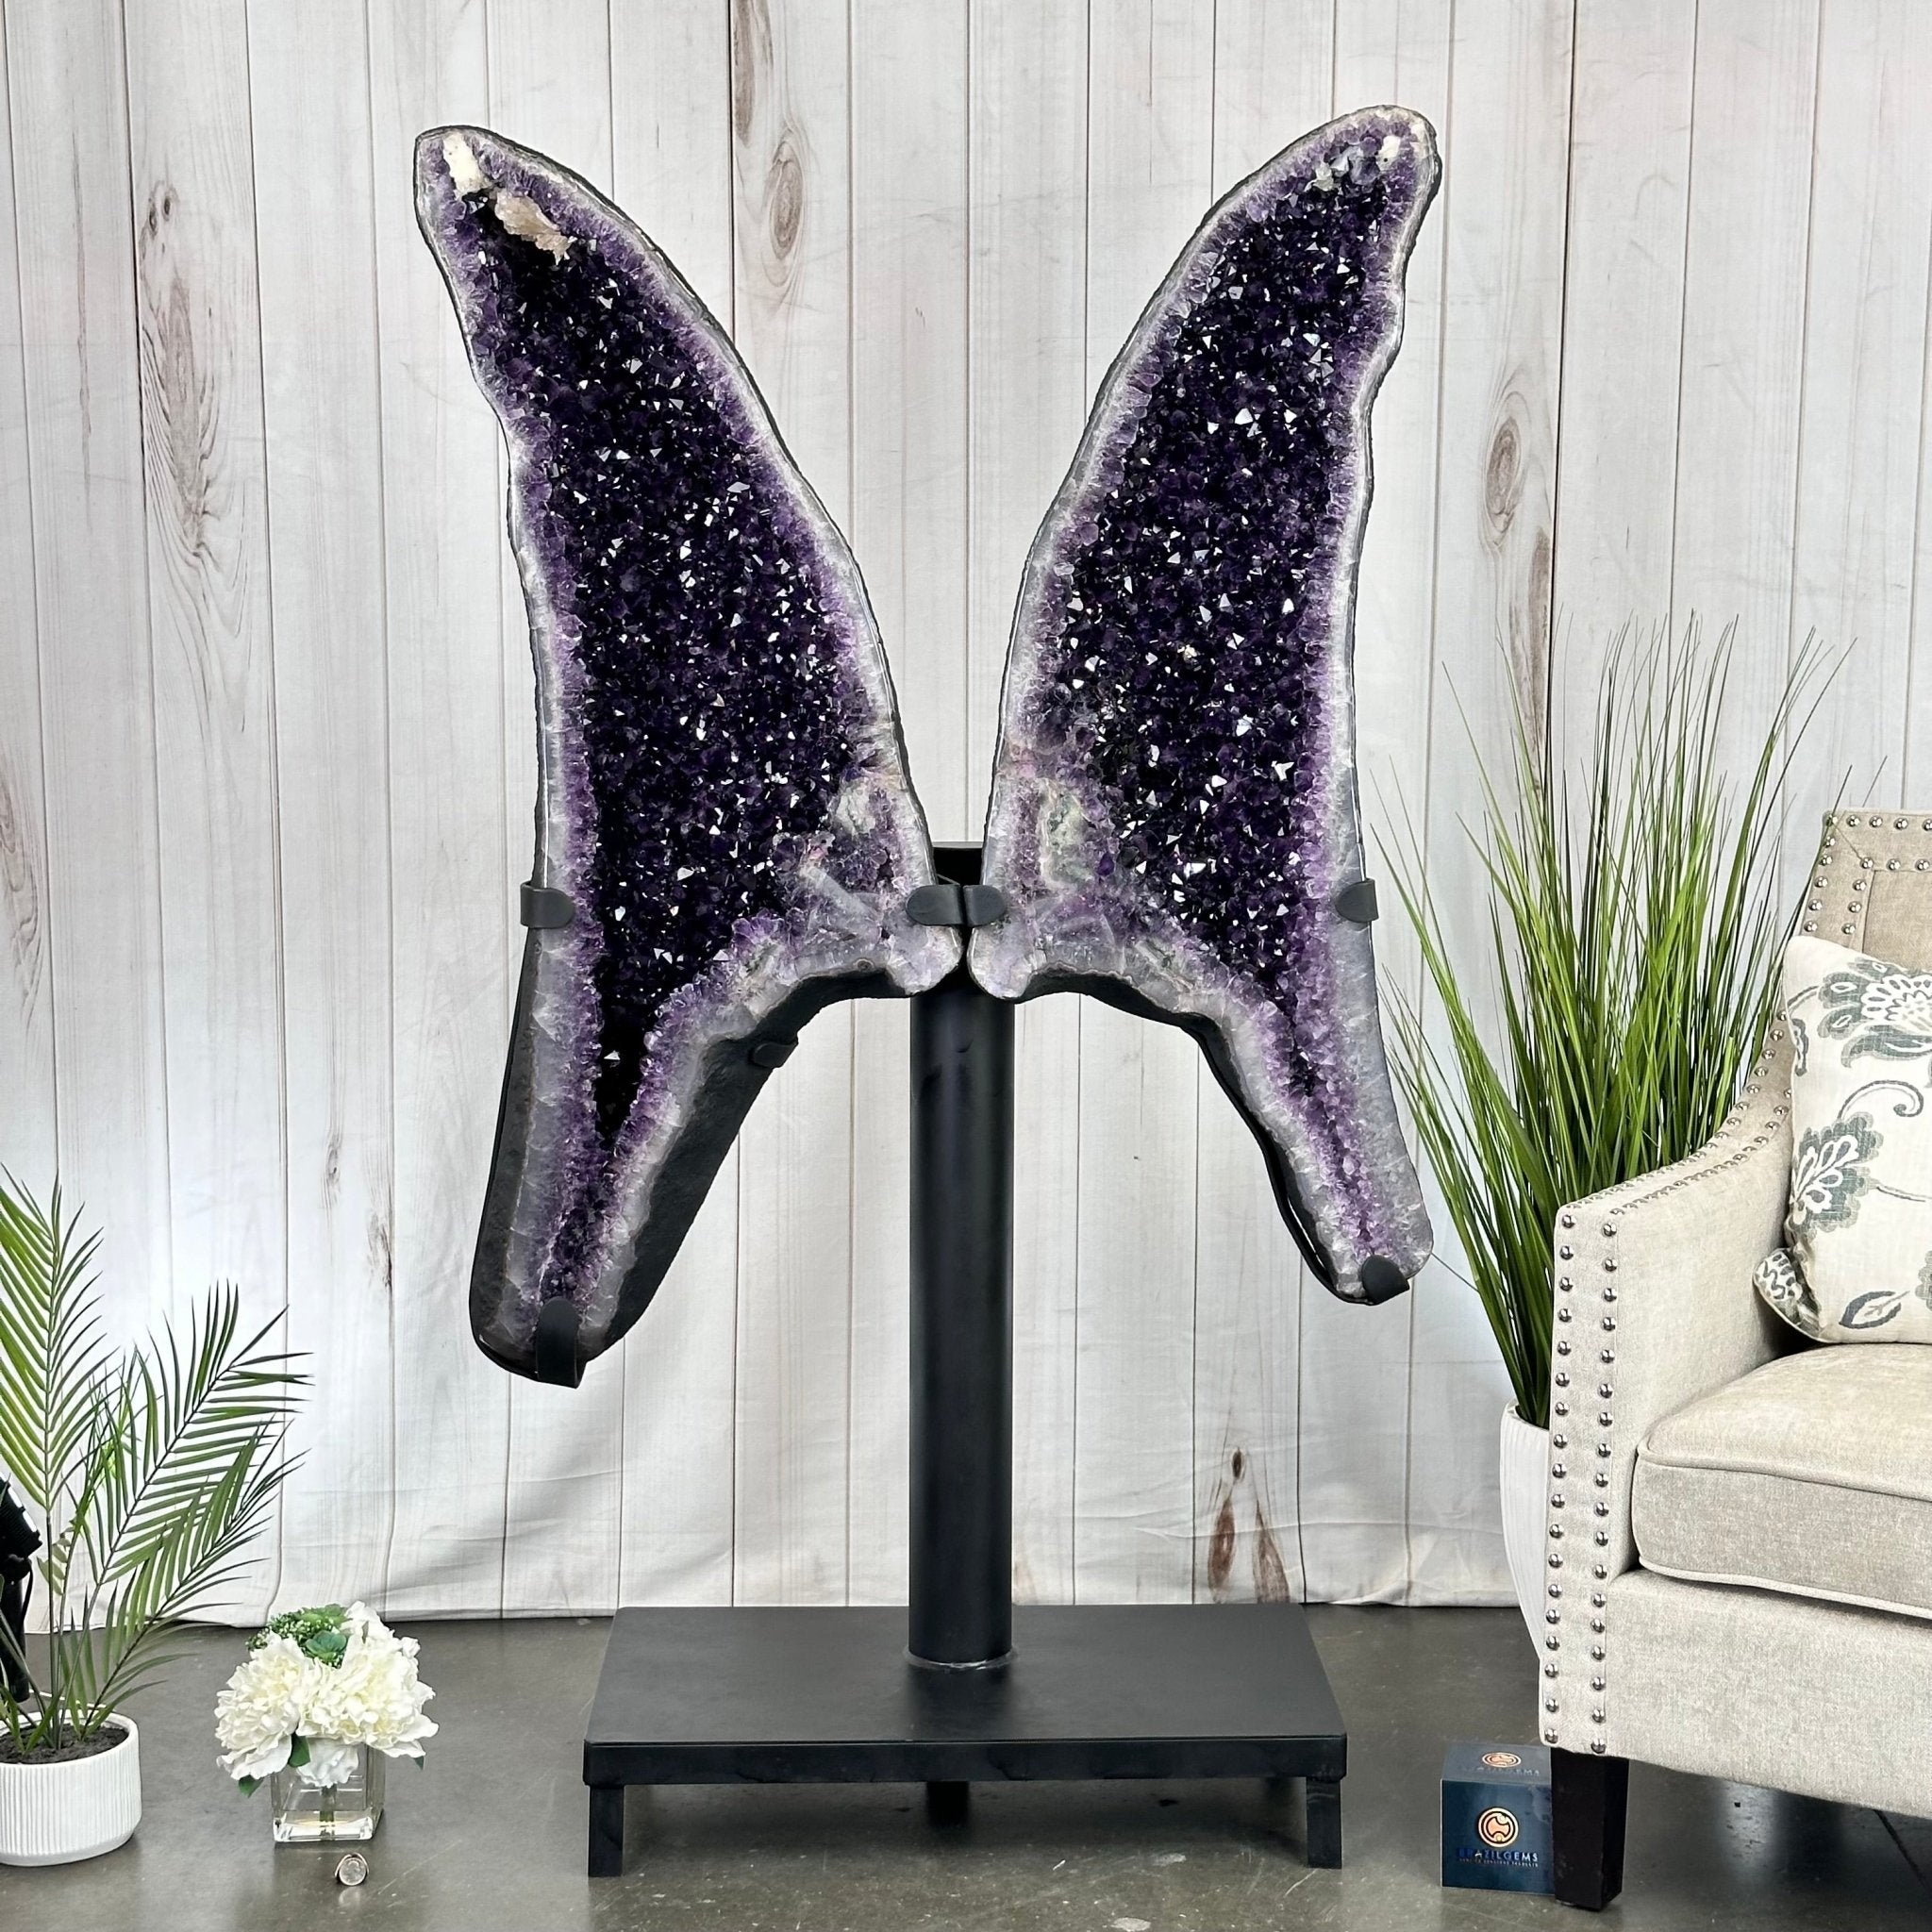 Large Super Quality Amethyst Wings on a Metal Stand, 337 lbs, 63" Tall #5493-0038 - Brazil GemsBrazil GemsLarge Super Quality Amethyst Wings on a Metal Stand, 337 lbs, 63" Tall #5493-0038Amethyst Butterfly Wings5493-0038